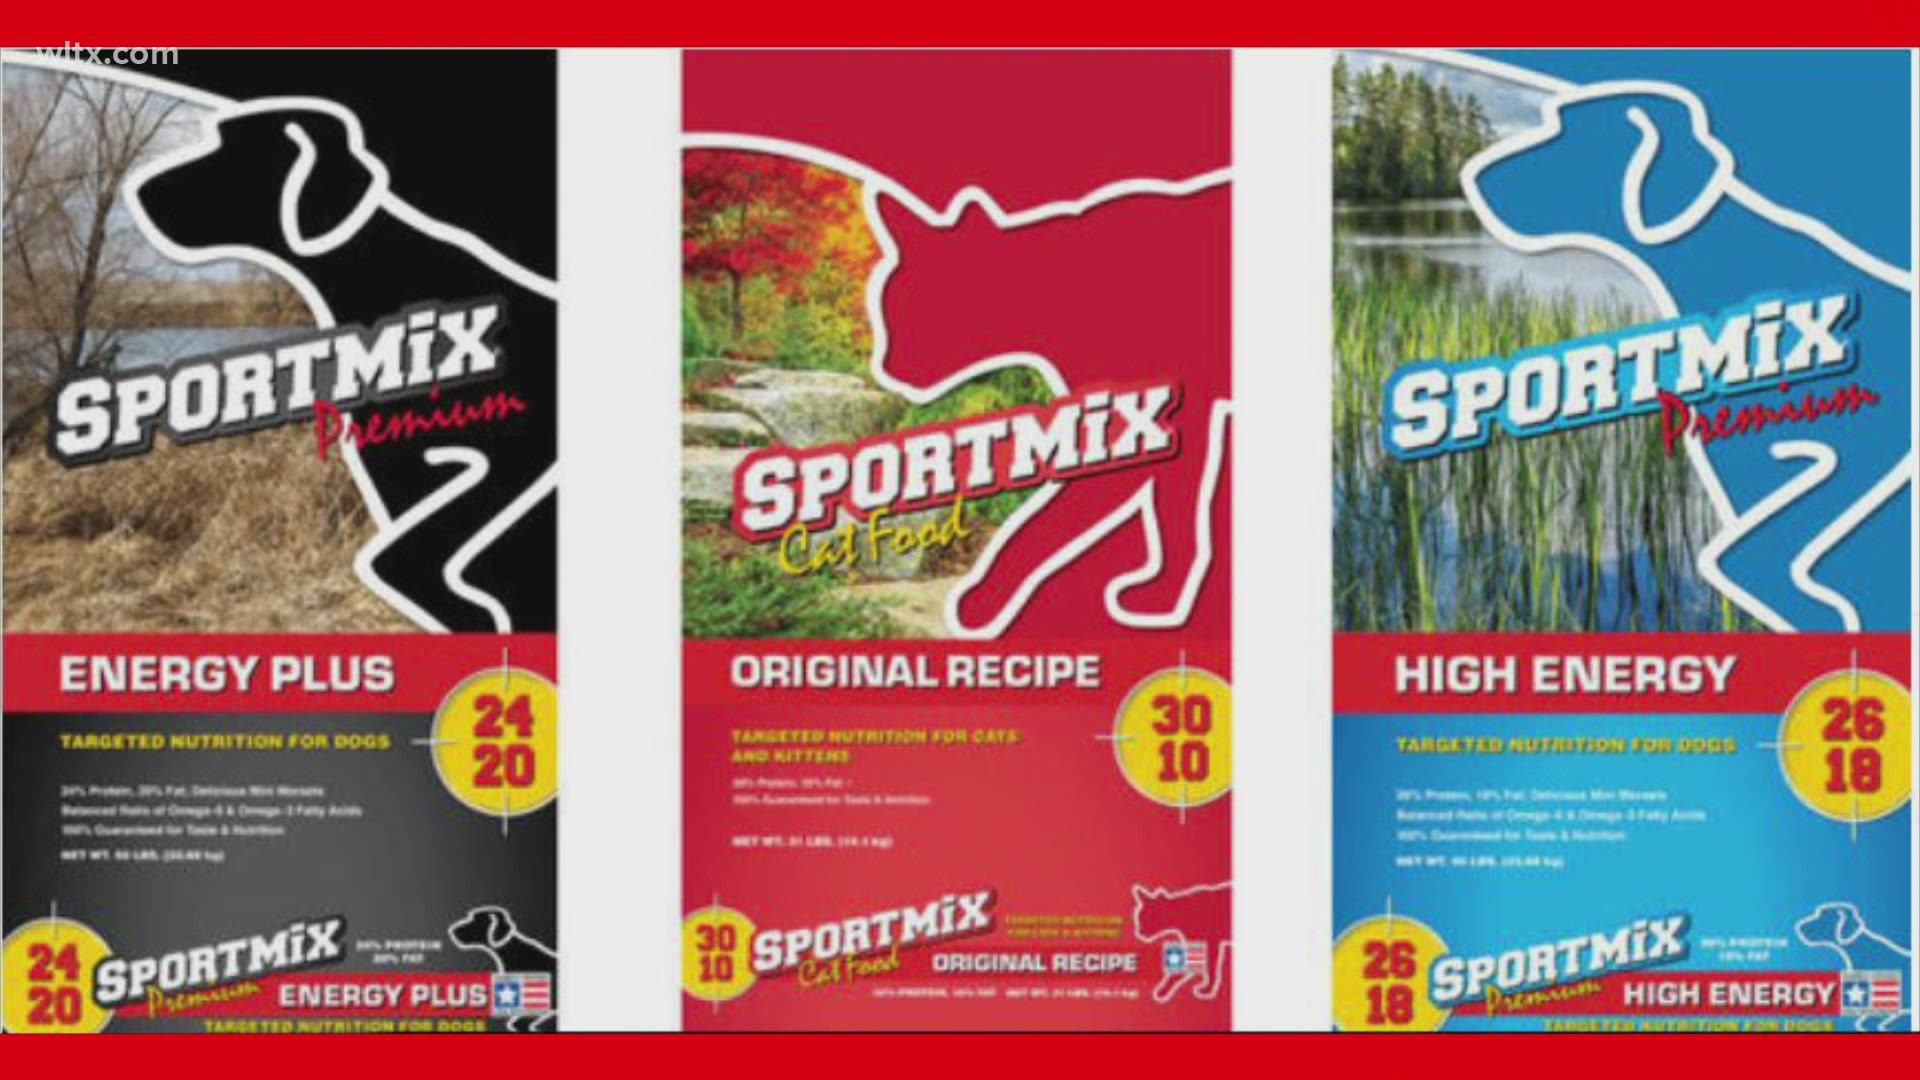 Varieties of Sportmix pet foods may contain potentially fatal levels of aflatoxins, which is produced by a type of mold.